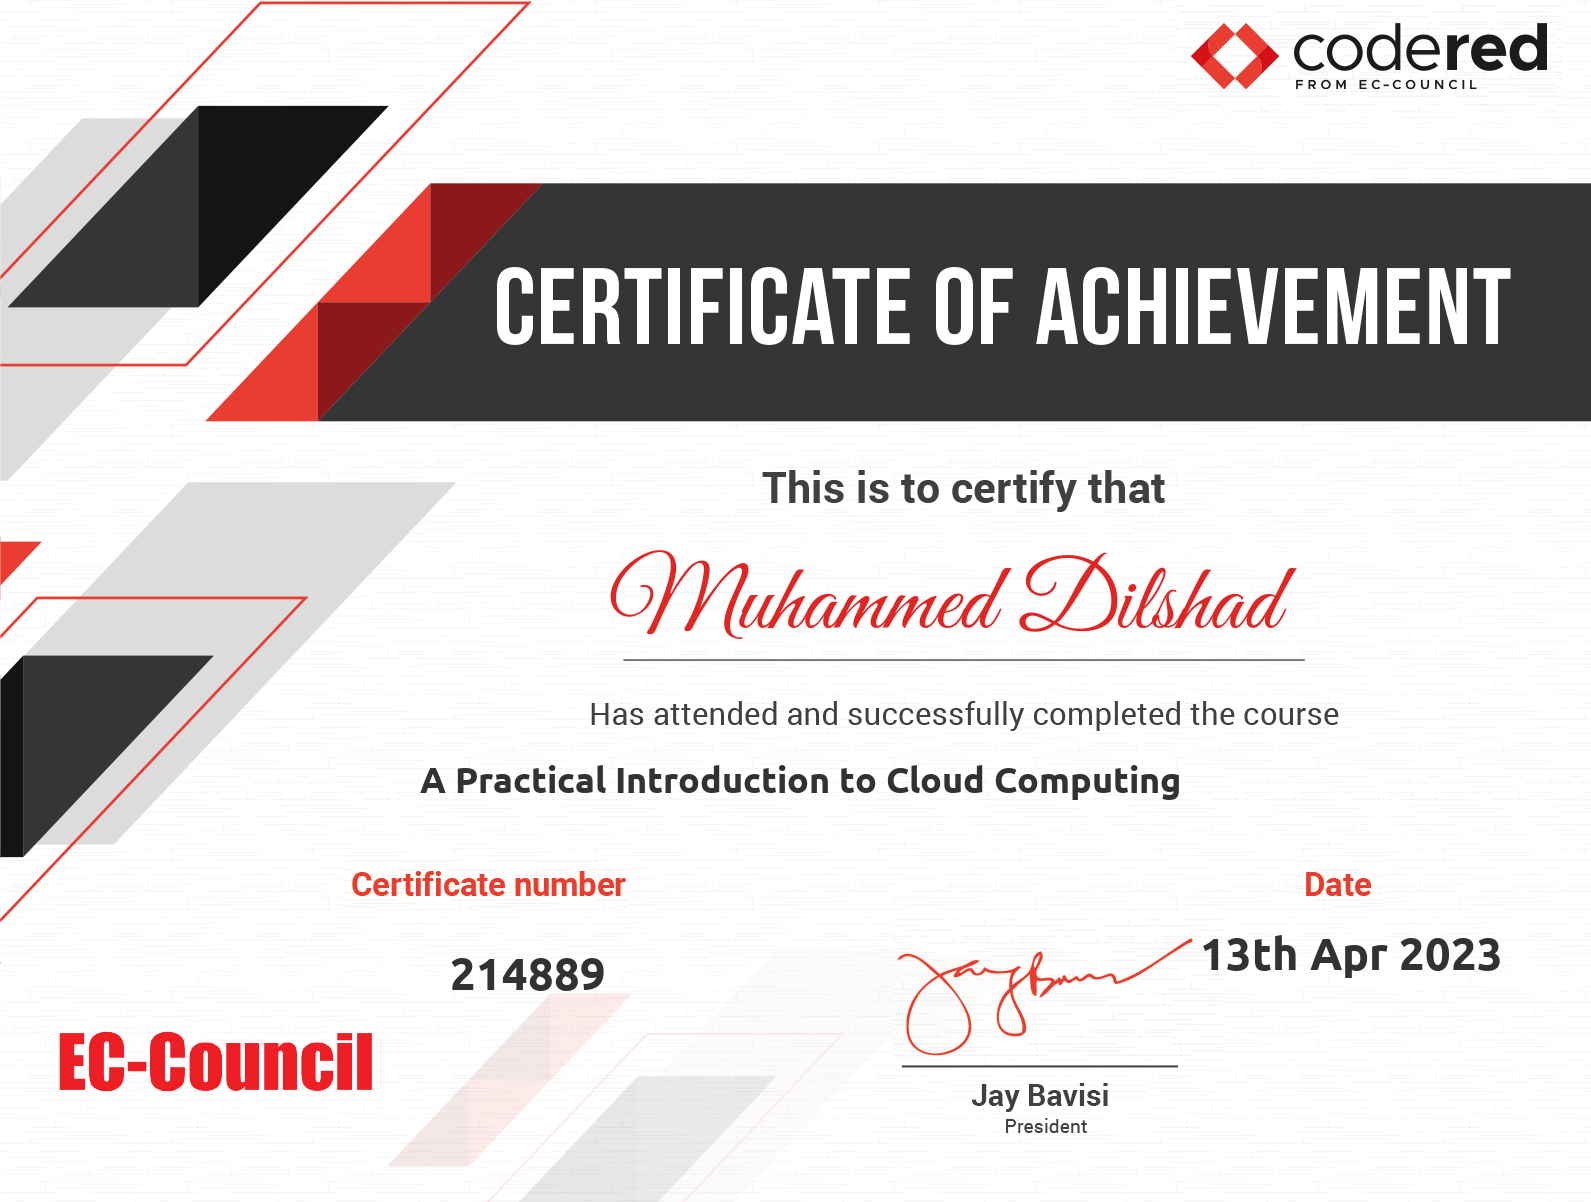 couNciL

> CERTIFICATE OF ACHIEVEMENT

This is to certify that

# O)Nlitemmed Dilstad

Has attended and successfully completed the course
A Practical Introduction to Cloud Computing
Certificate number Date

214889 SE Apr 2023

Jay Bavisi

President